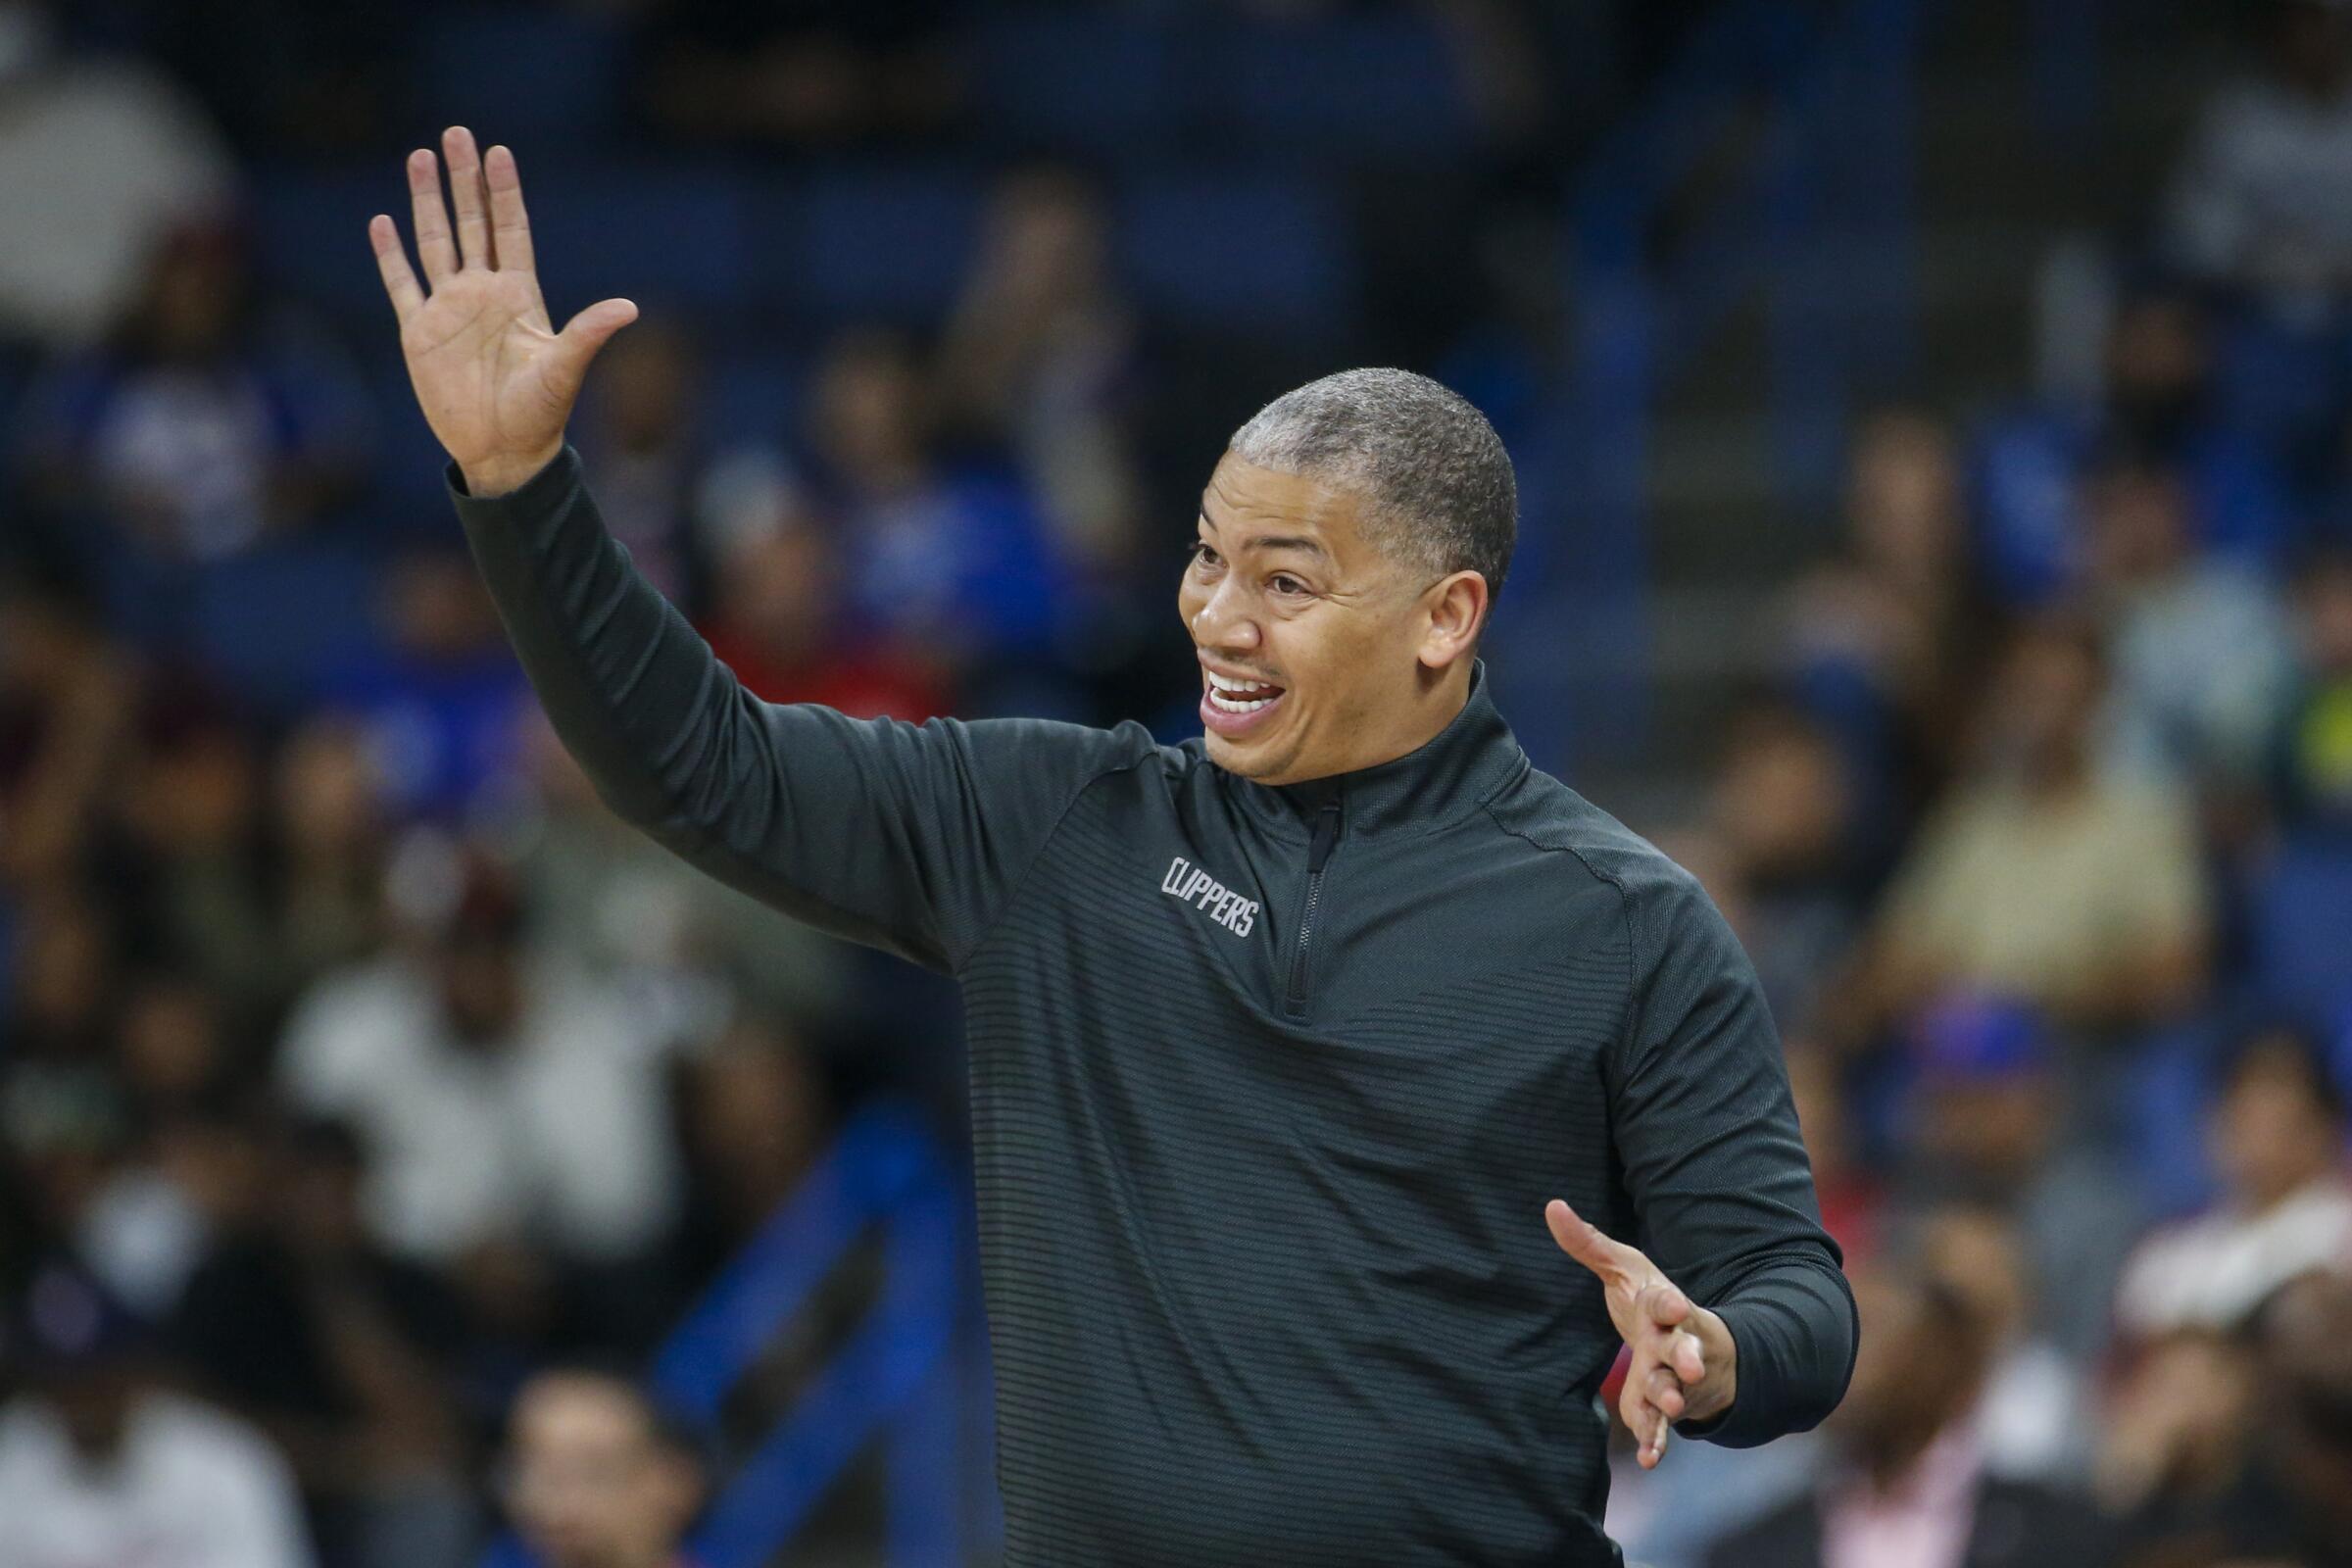 Clippers coach Tyronn Lue raises his right arm while calling out instructions to his players on the court.